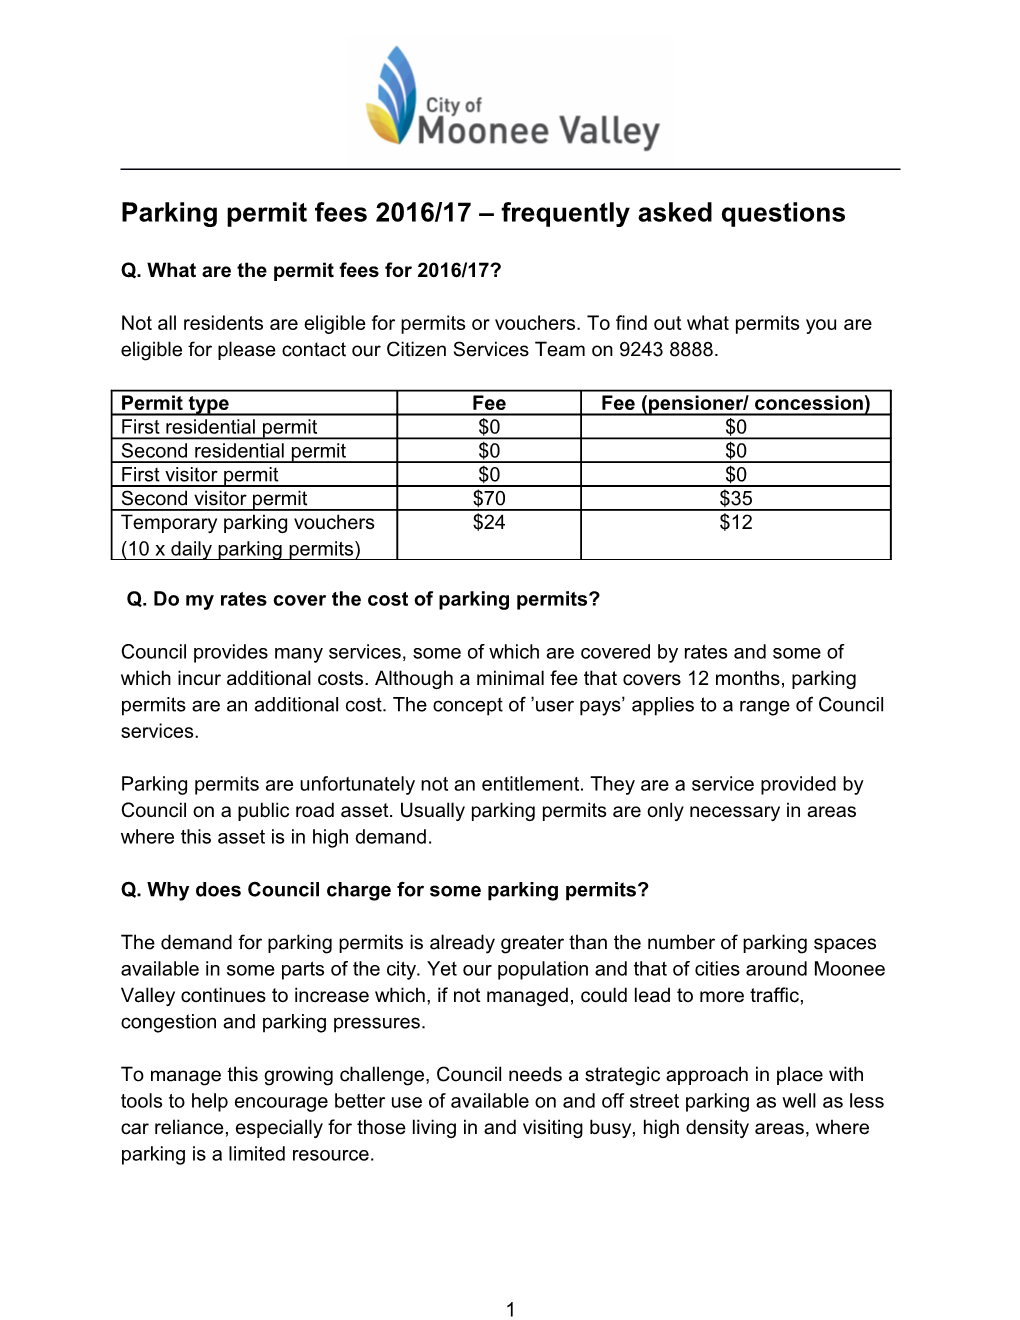 Parking Permit Fees 2016/17 Frequently Asked Questions